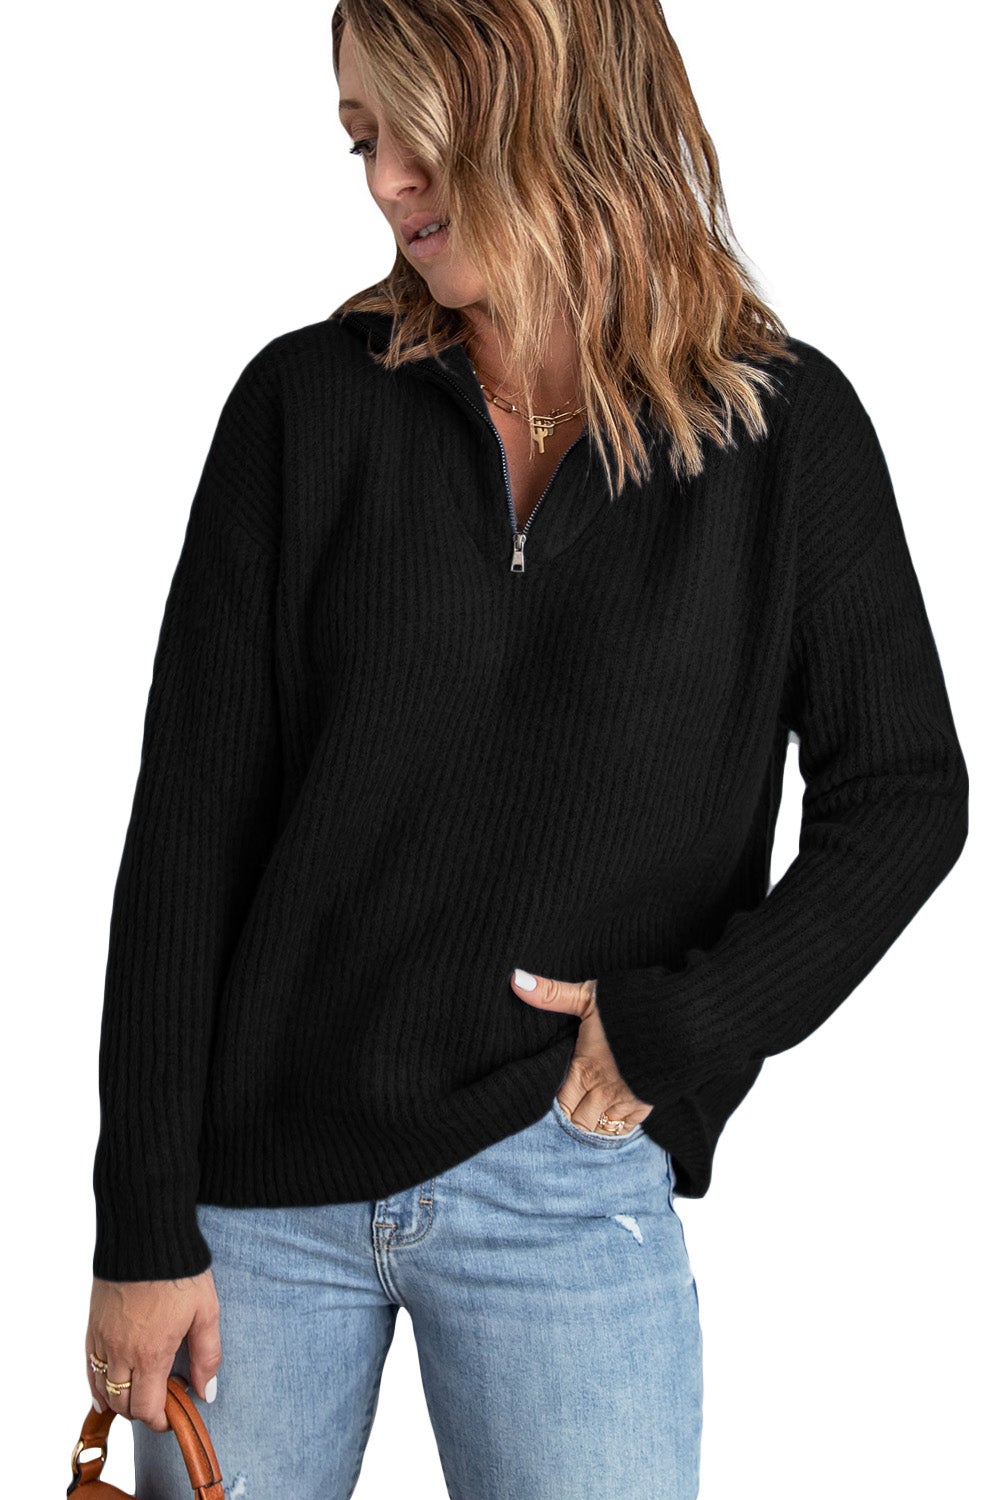 Black Zip Neck Knitted Sweater